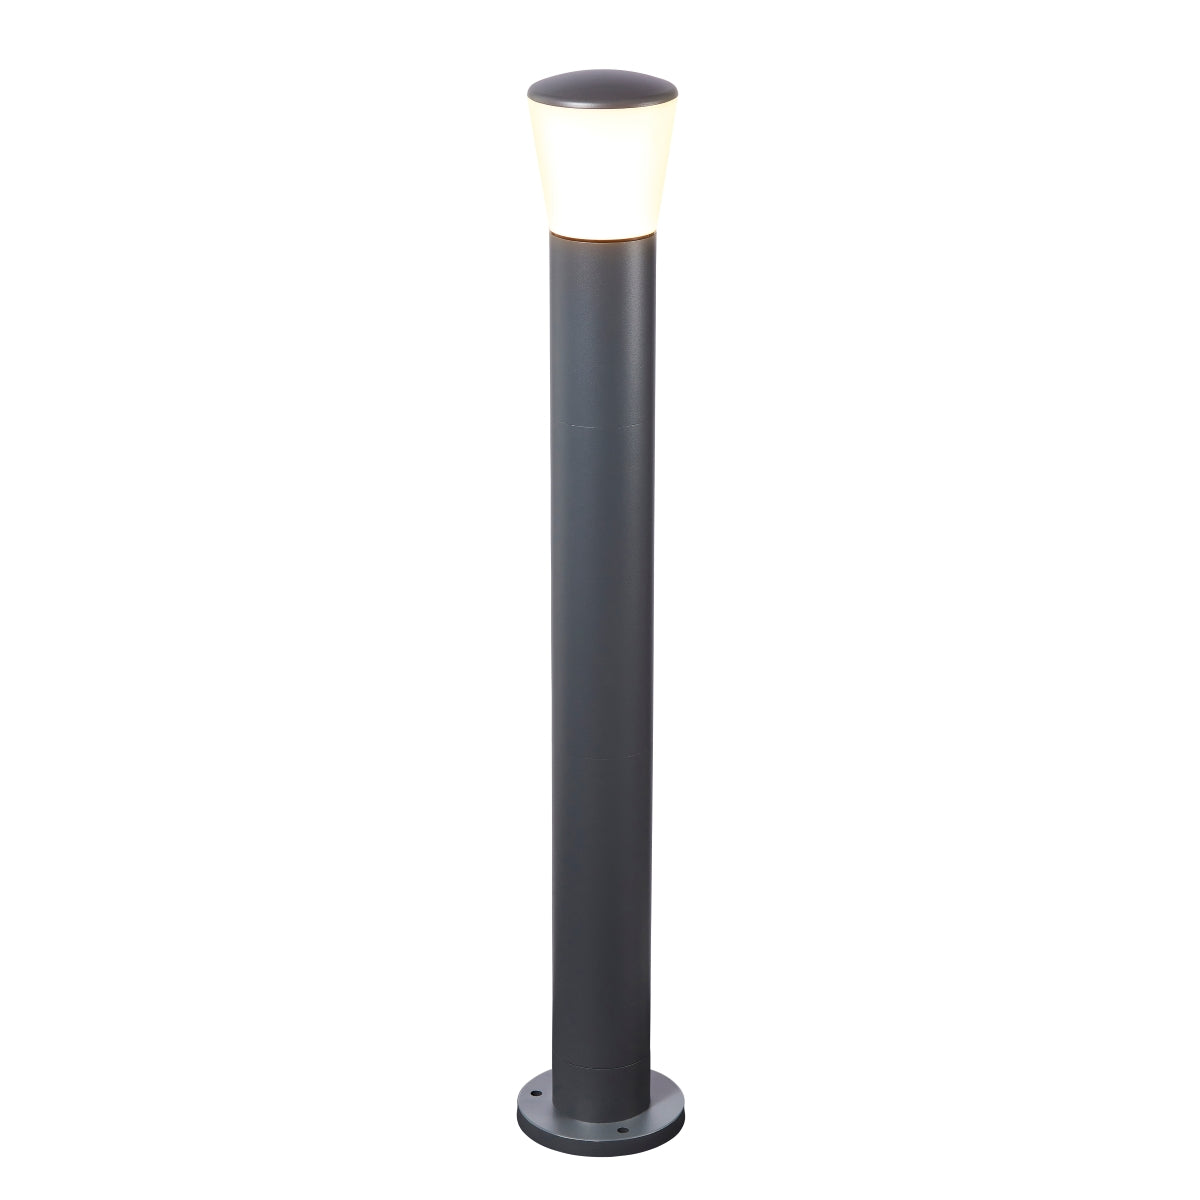 Our Reuben dark grey anthracite outdoor post light would look perfect in a modern or more traditional home design. Outside post lights can provide atmospheric light in your garden, at the front door or on the terrace as well as a great security solution. It is designed for durability and longevity with its robust material producing a fully weatherproof and water resistant light fitting. Height can be adjusted at installation.